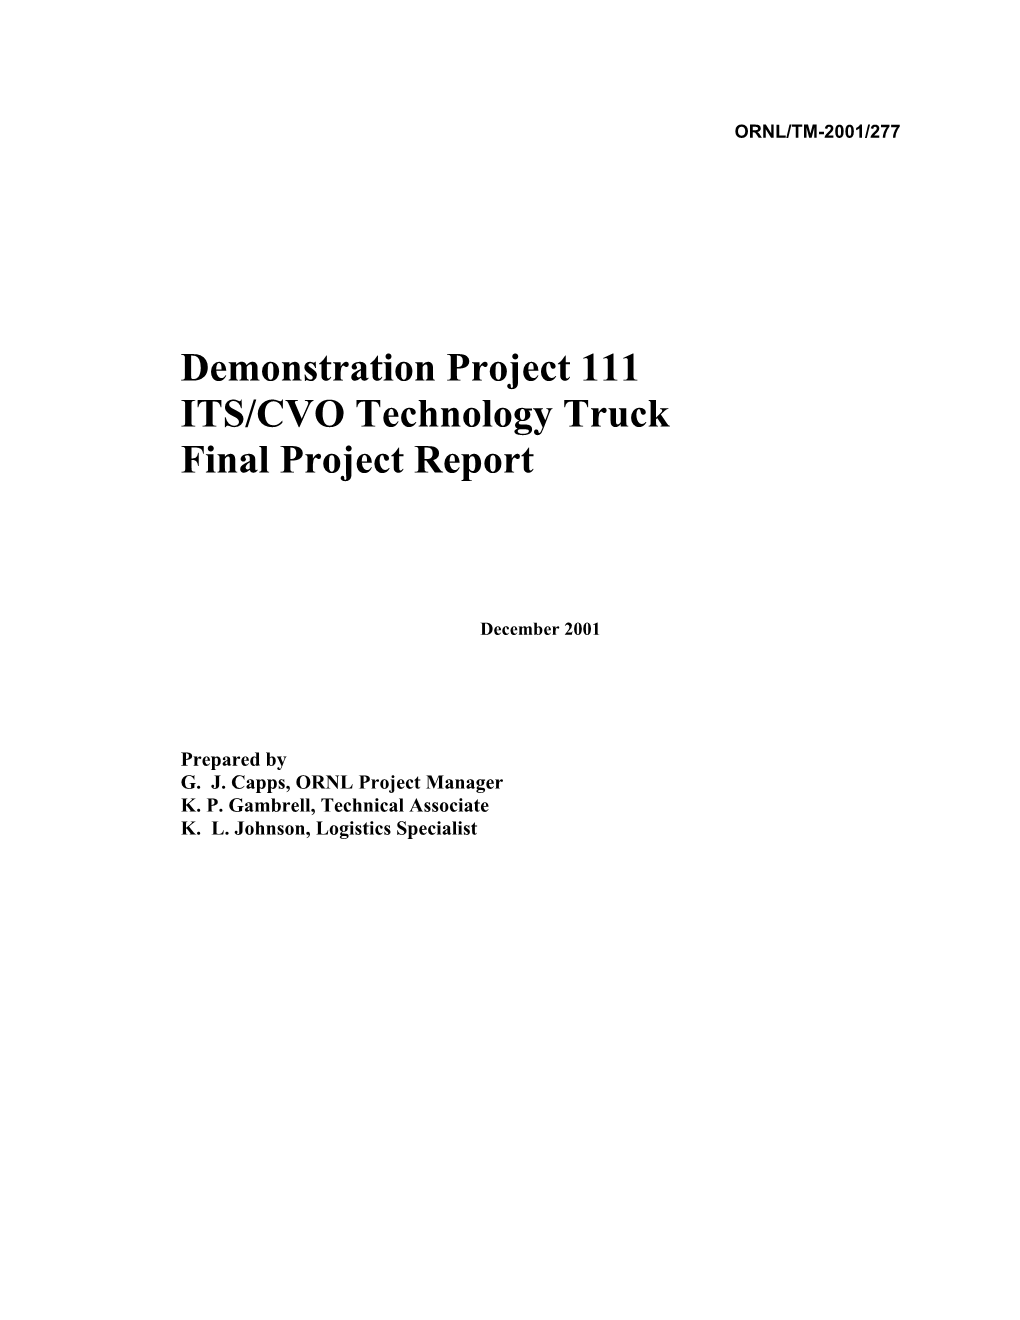 Demonstration Project 111 Its/Cvo Technology Truck Final Project Report